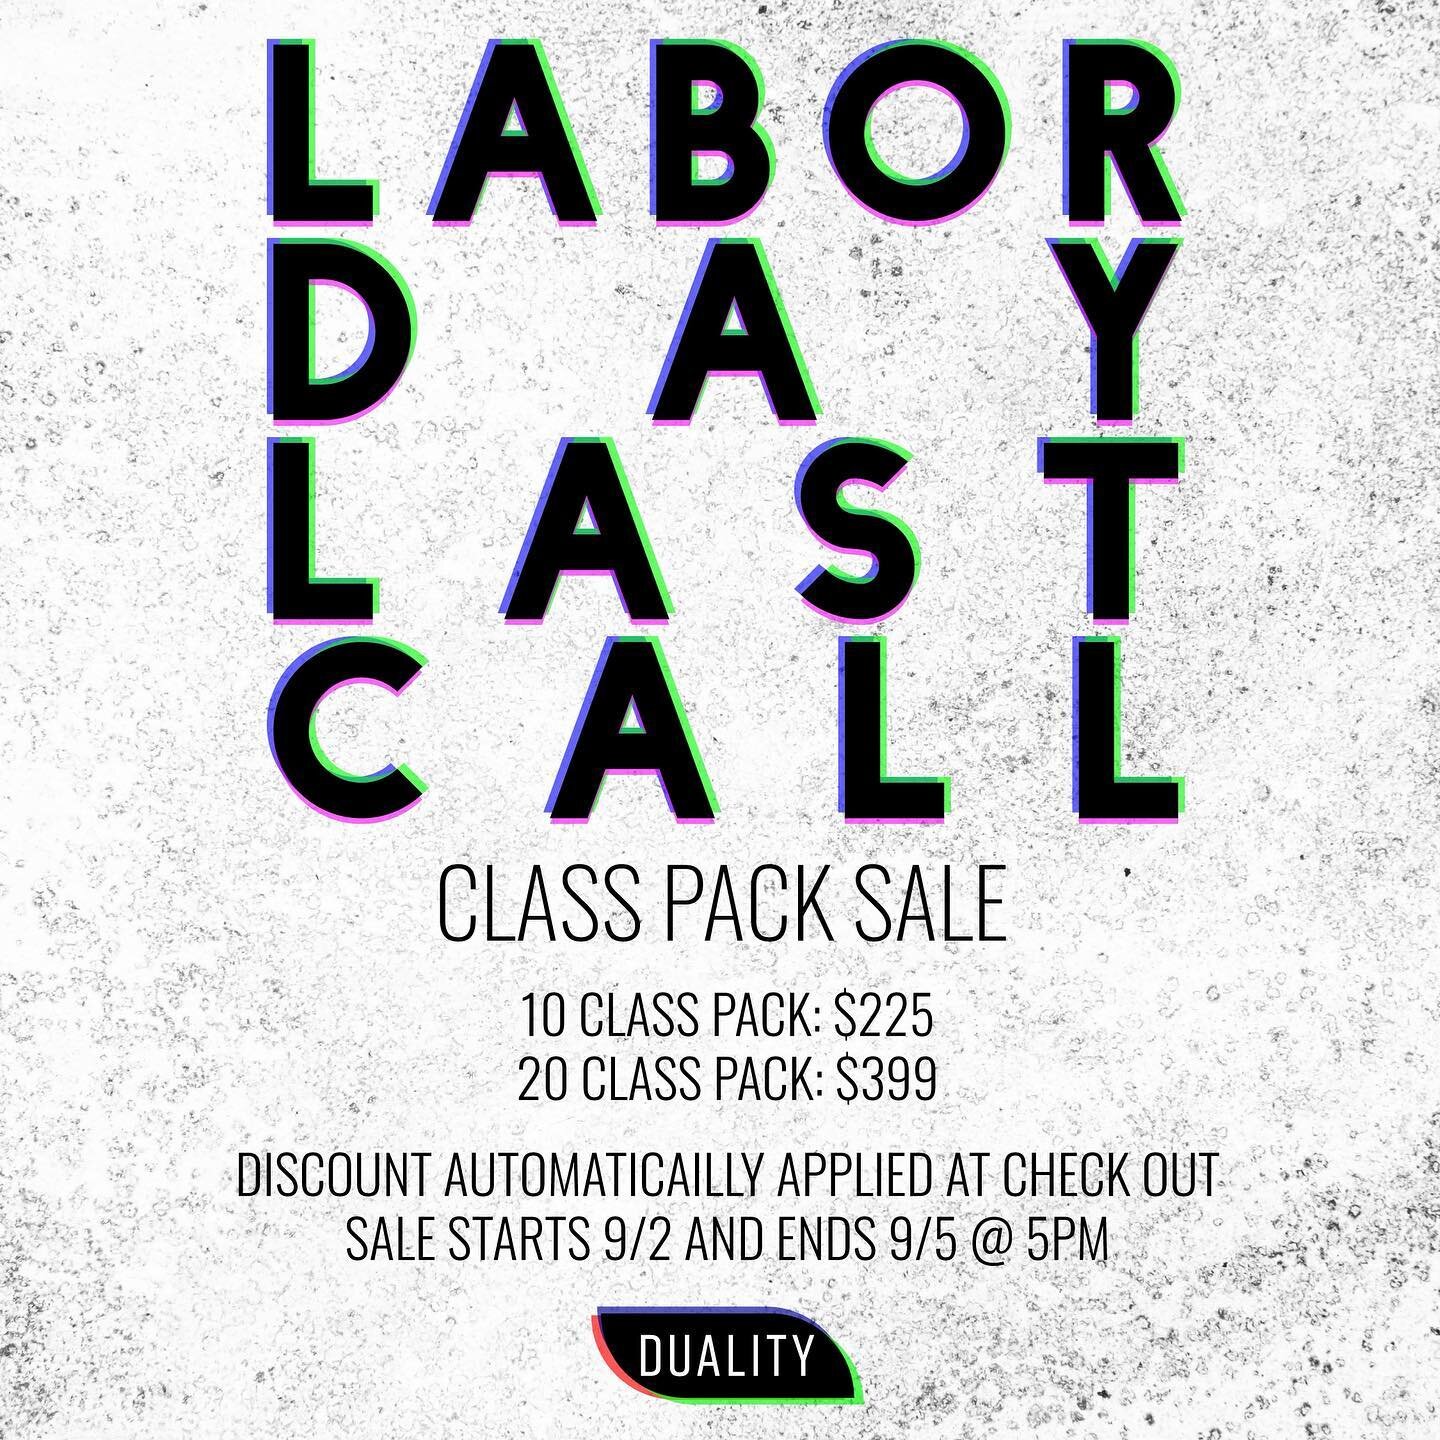 LABOR DAY LAST CALL PACKAGE SALE! 

It's our final package sale before the expansion is complete and prices increase. Snag yours to load up on classes and experience Duality 2.0!

10 Classes for $225
20 Classes for $399
*NO EXPIRATION*

Link in bio o